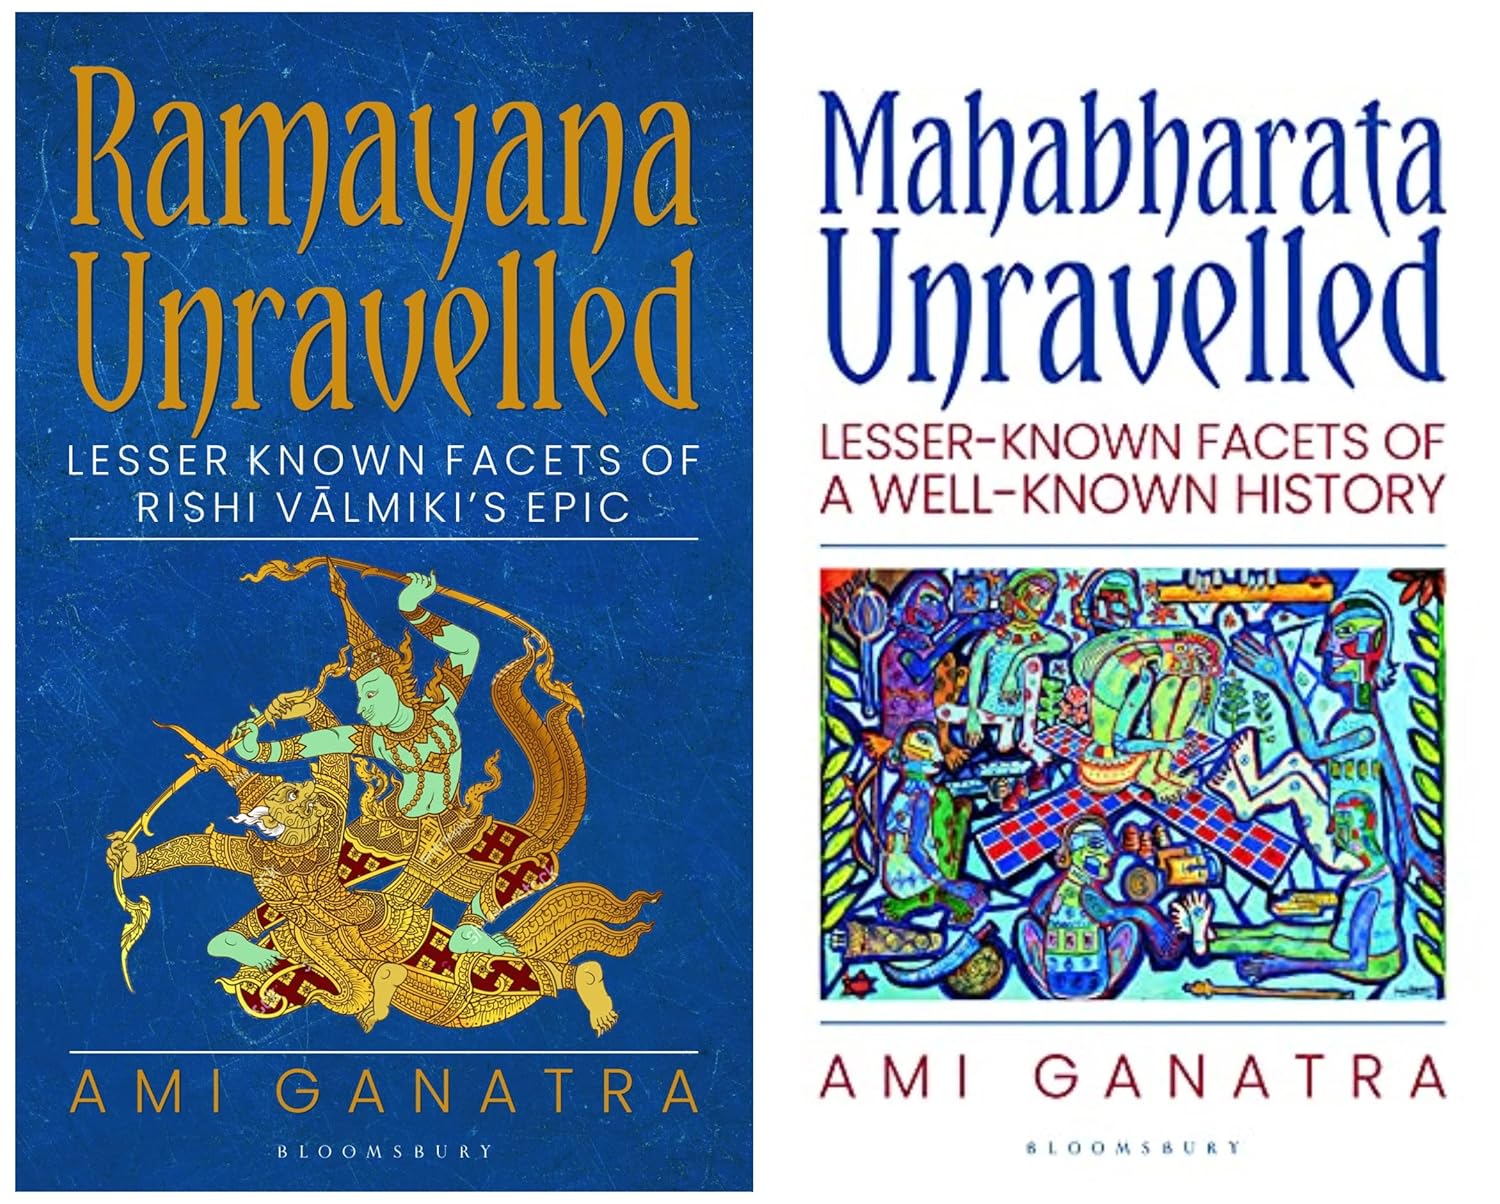 Combo of Ramayana Unravelled & Mahabharata Unravelled: Lesser-Known Facets of a Well-Known History